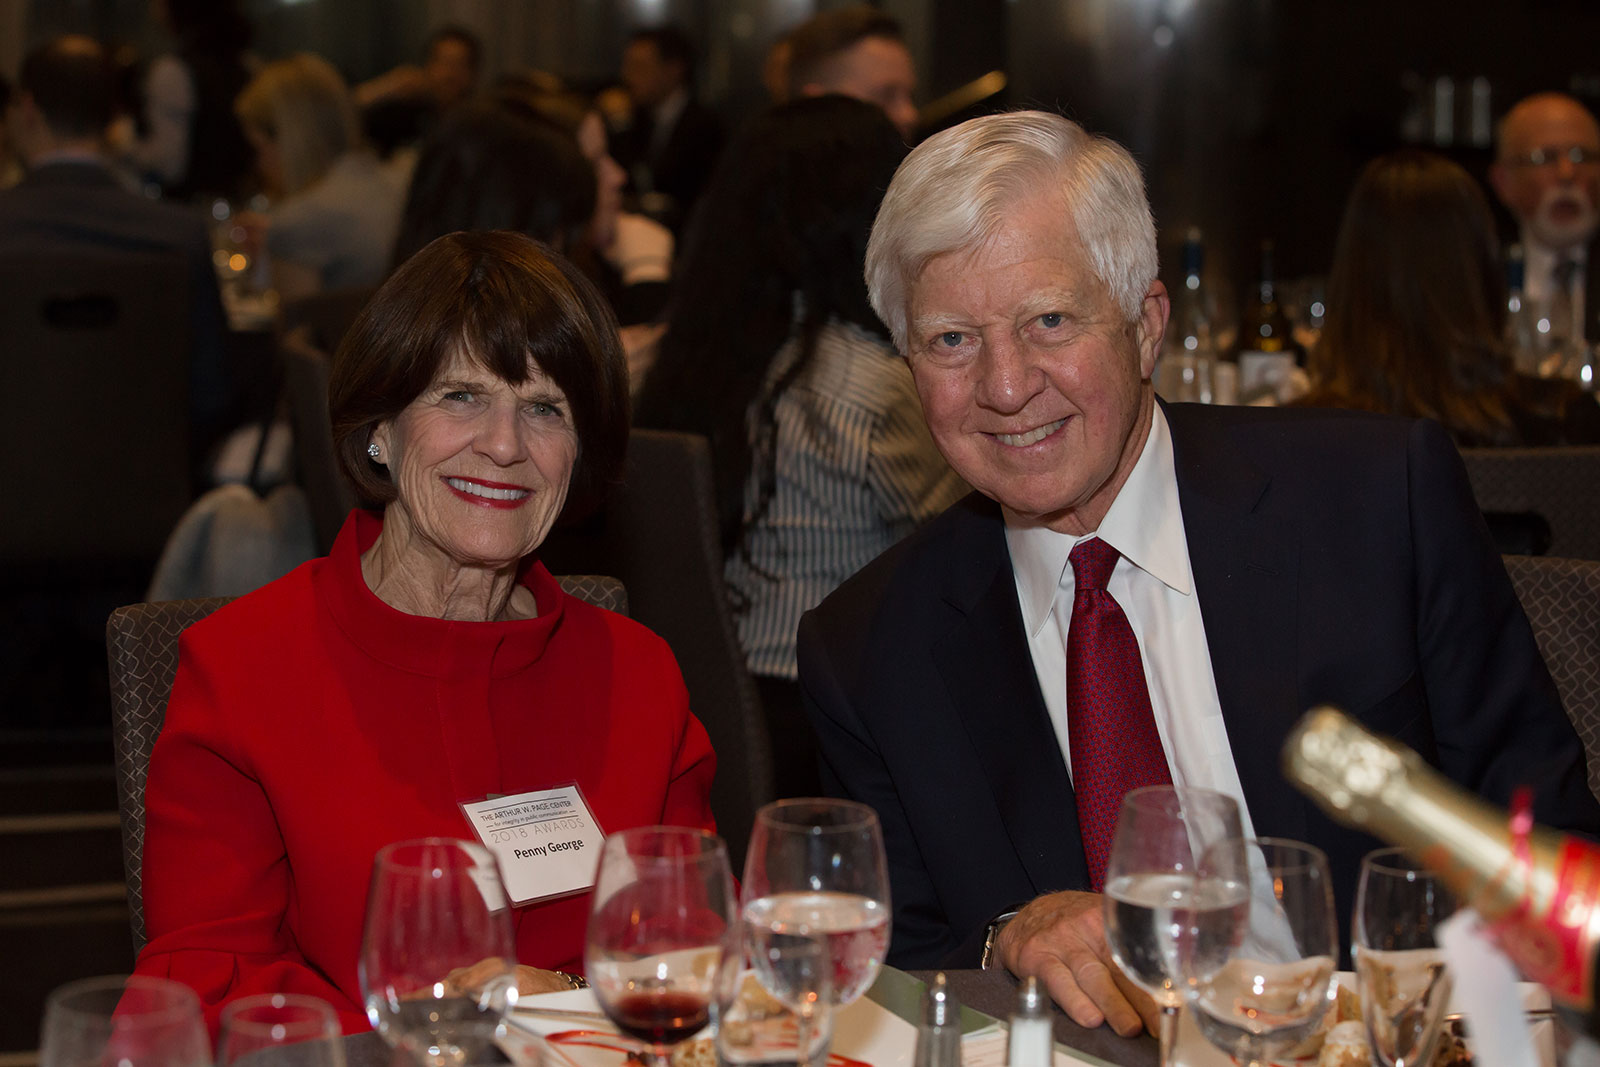 2018 Larry Foster Awards honoree Bill George and his wife Penney.